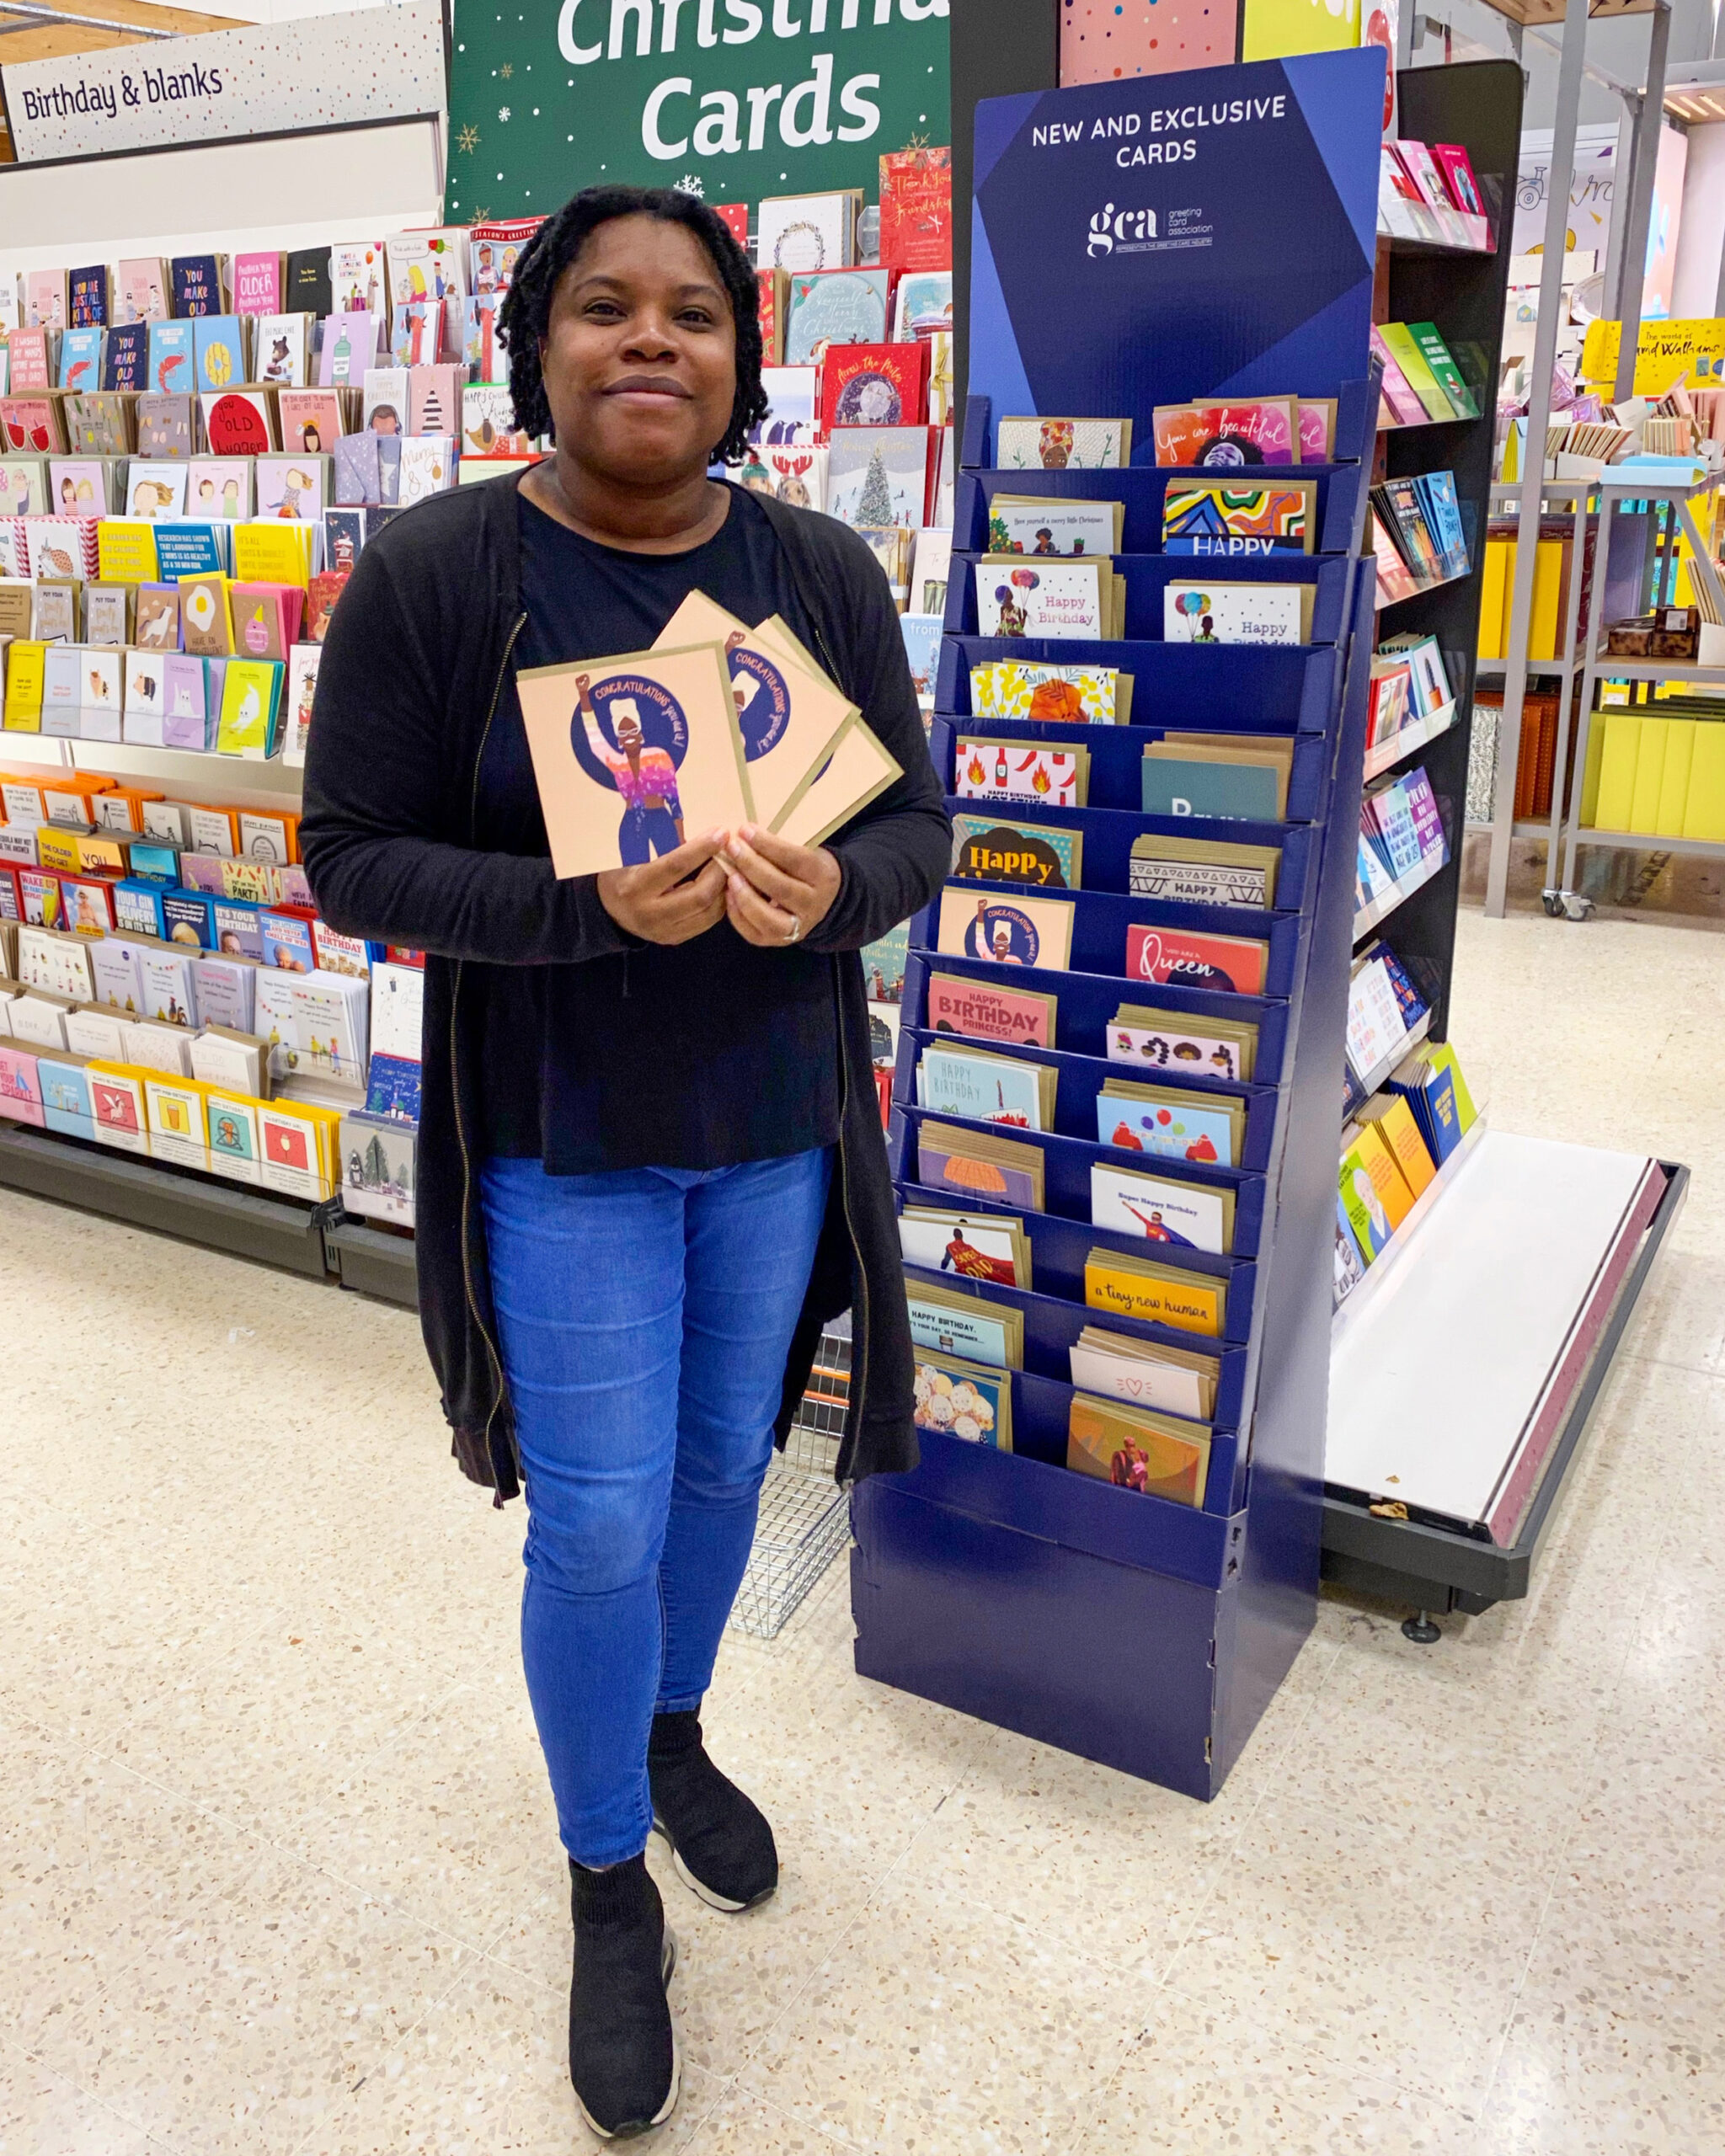 Kareen Cox standing with her Black History Months cards in Sainsburys